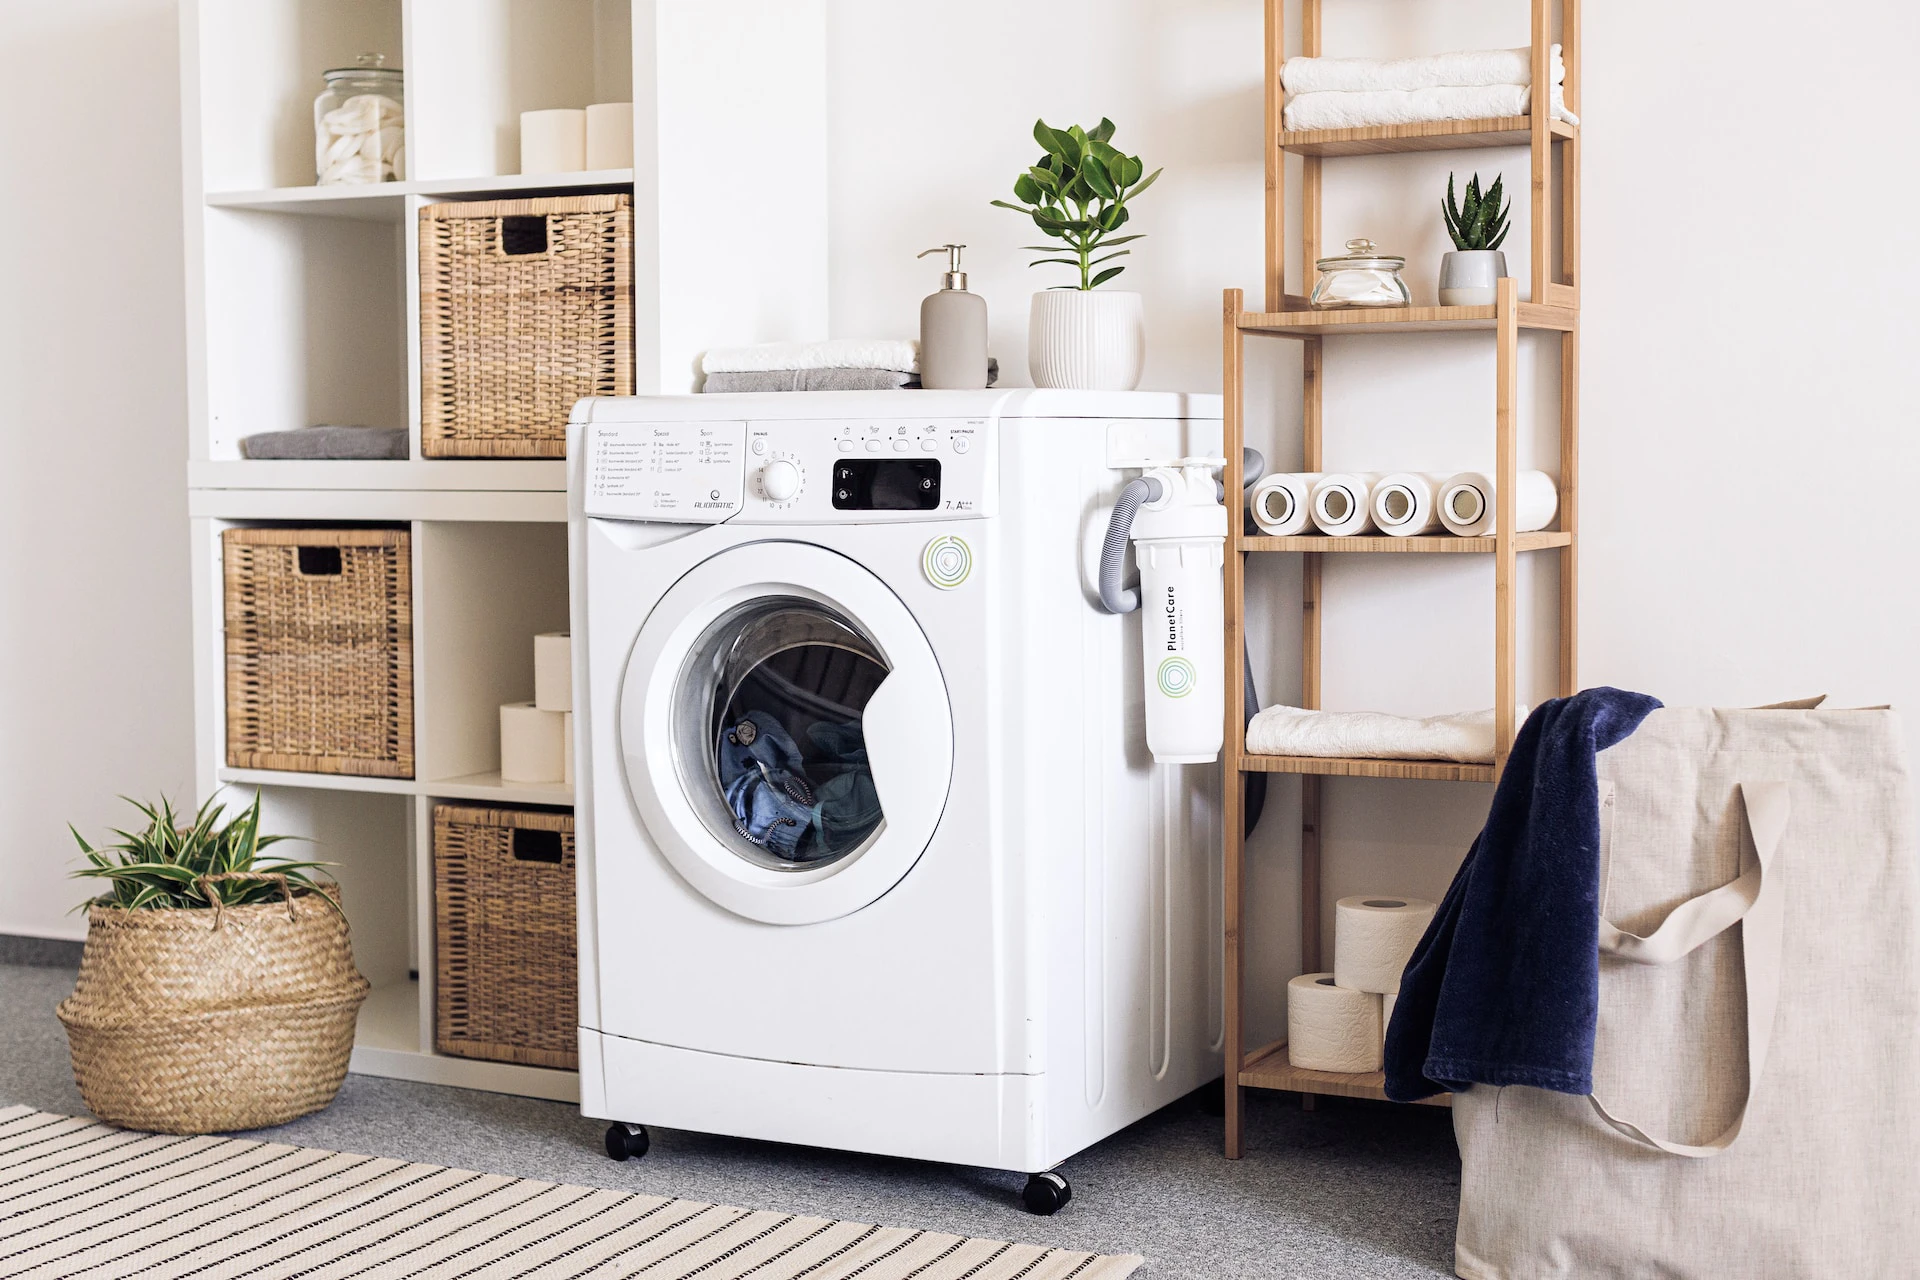 A white washing machine in a utility room surrounded by shelves and a laundry bag